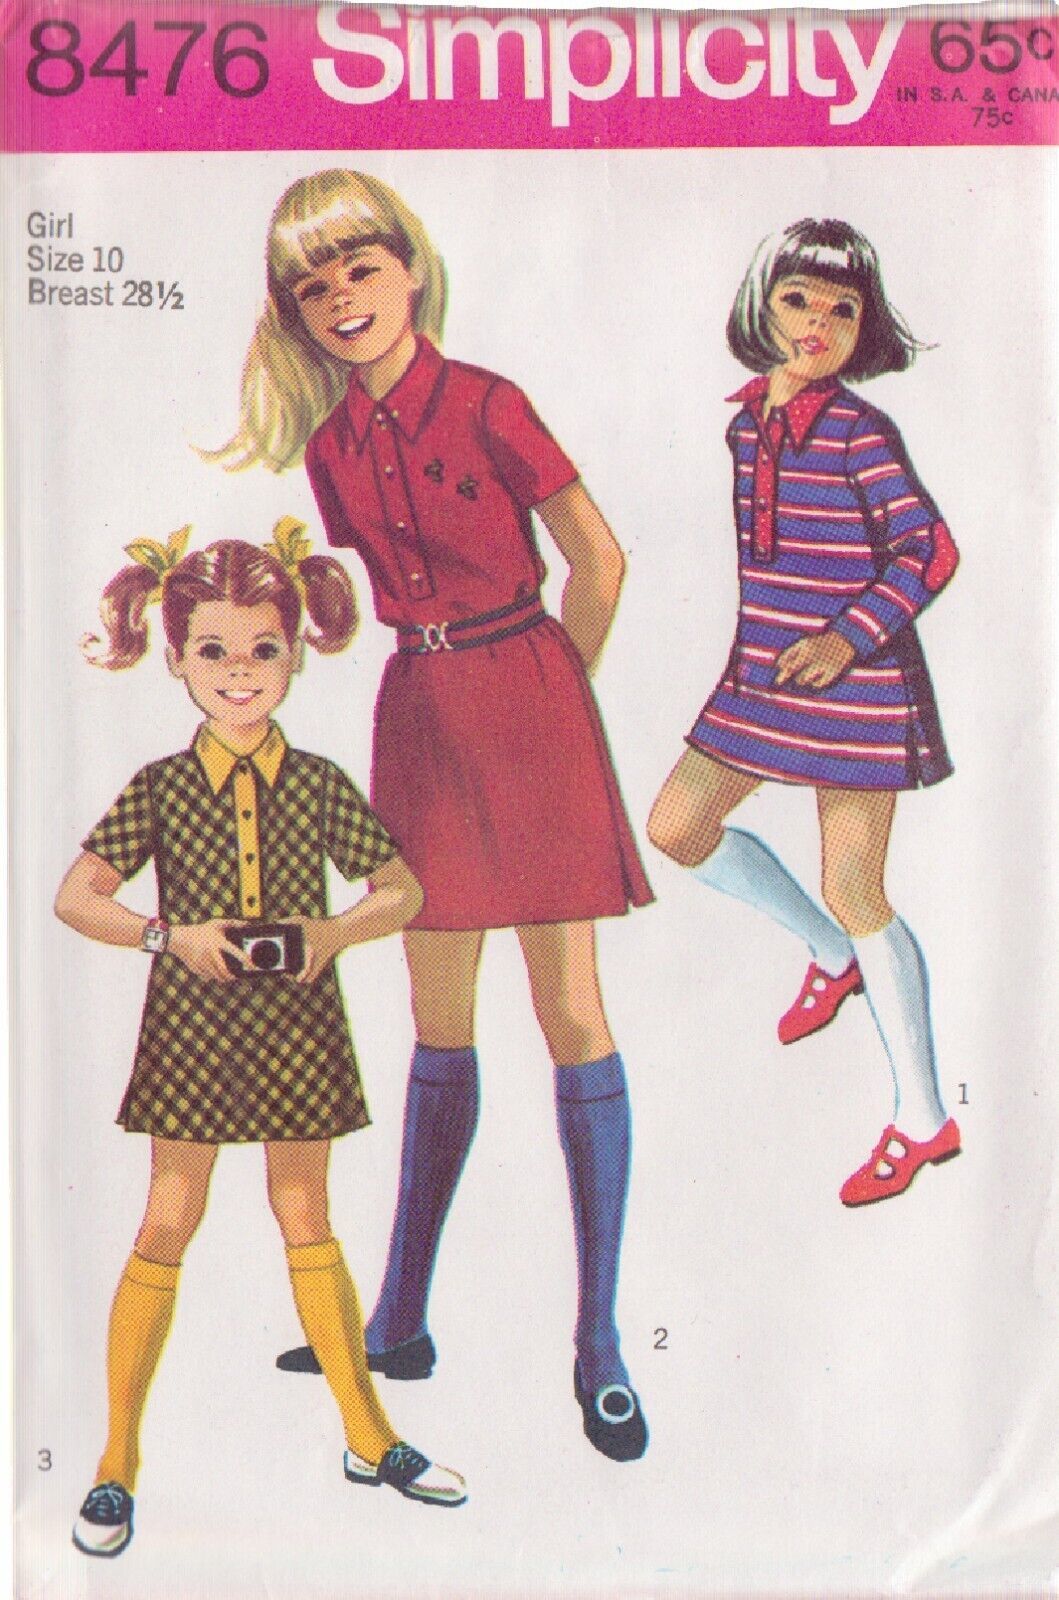 SIMPLICITY PATTERN 8476 SIZE 10 FOR GIRL’S DRESS IN 3 VARIATIONS UNCUT - $3.00